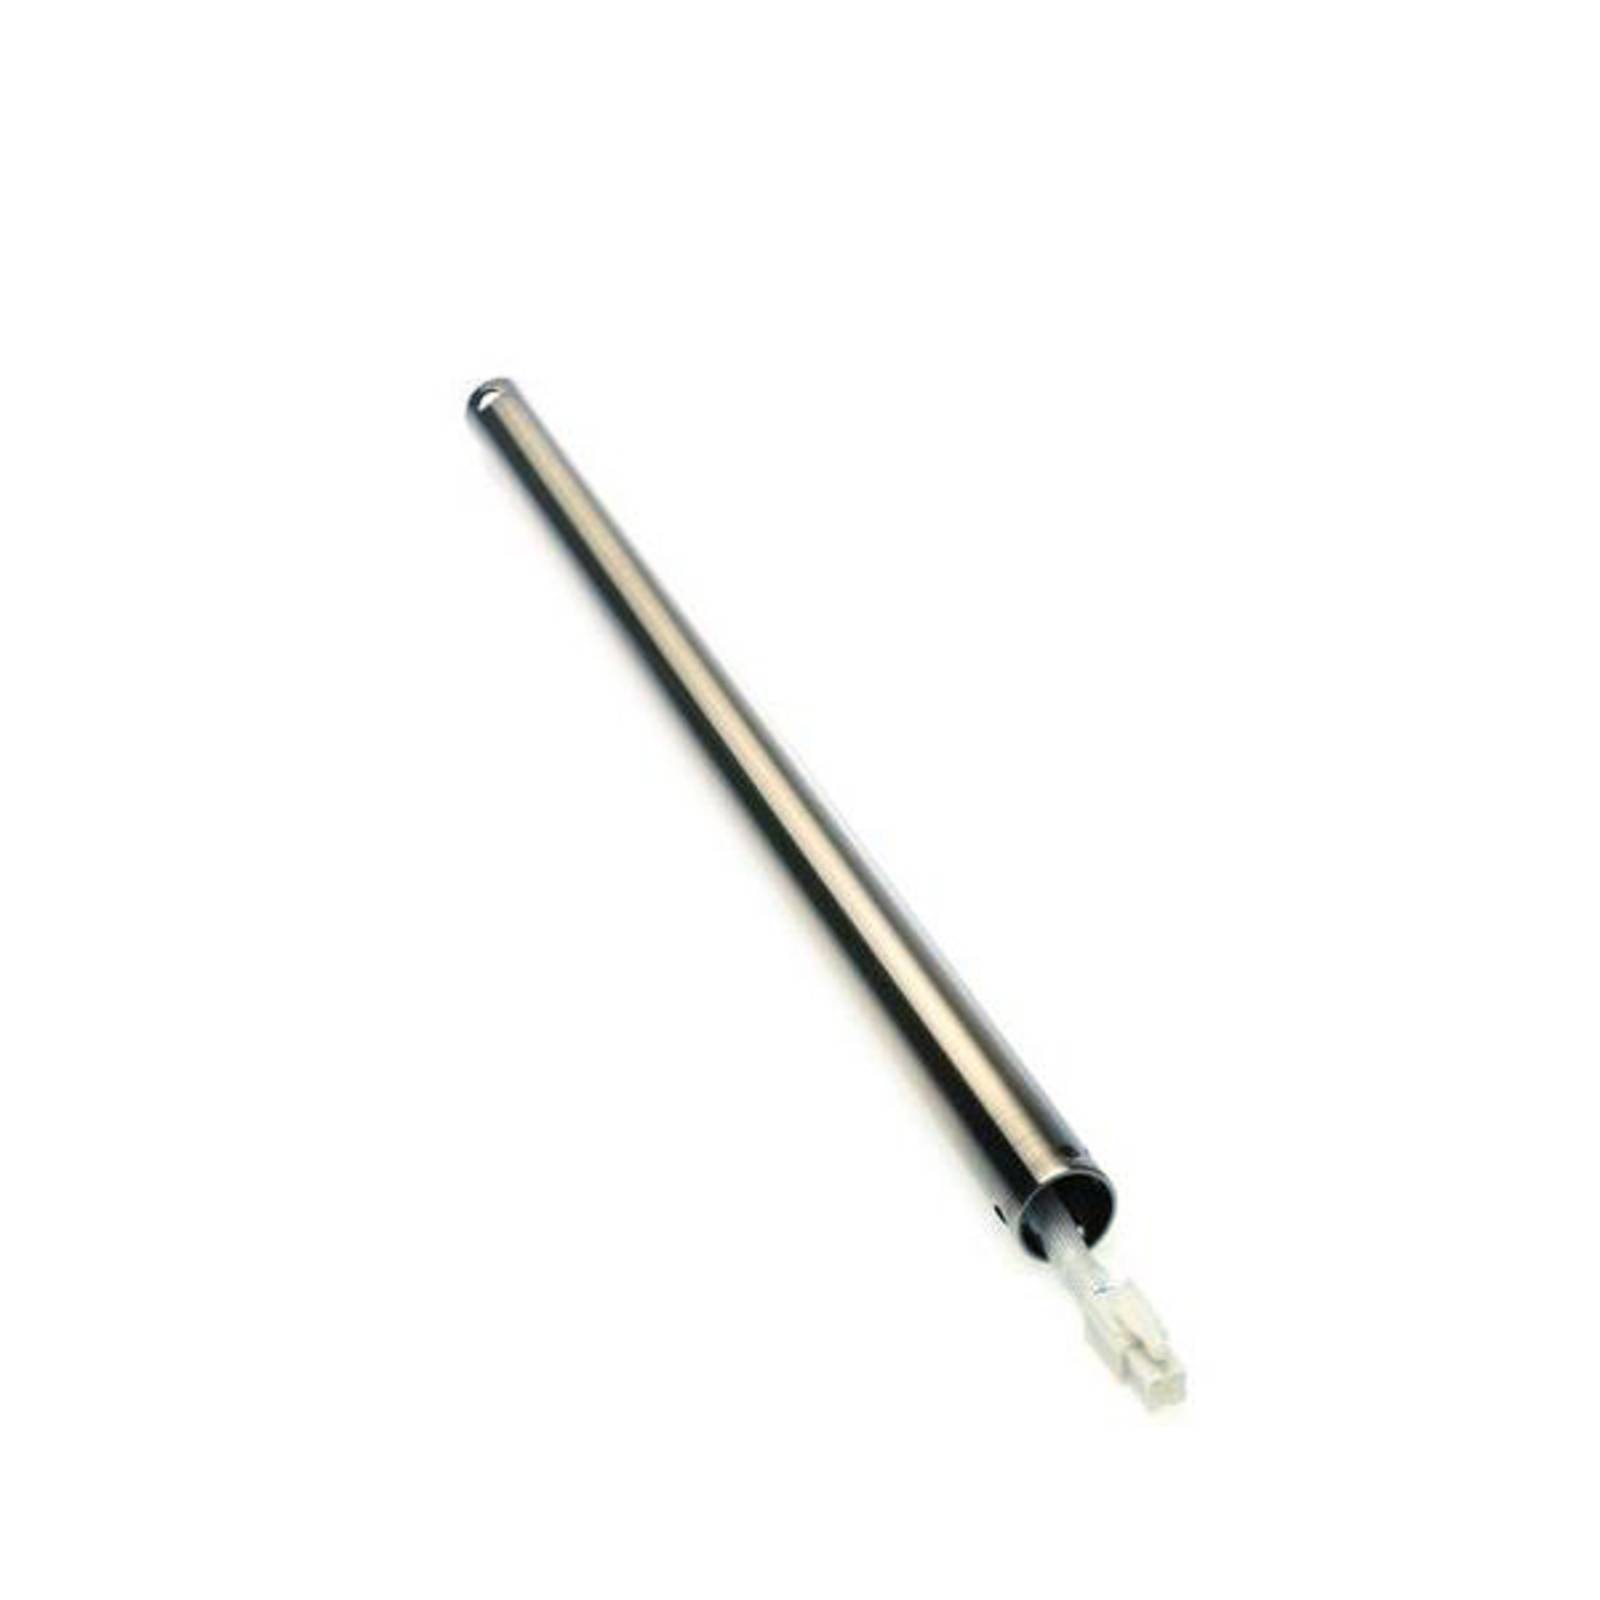 30.5 cm extension rod in brushed nickel